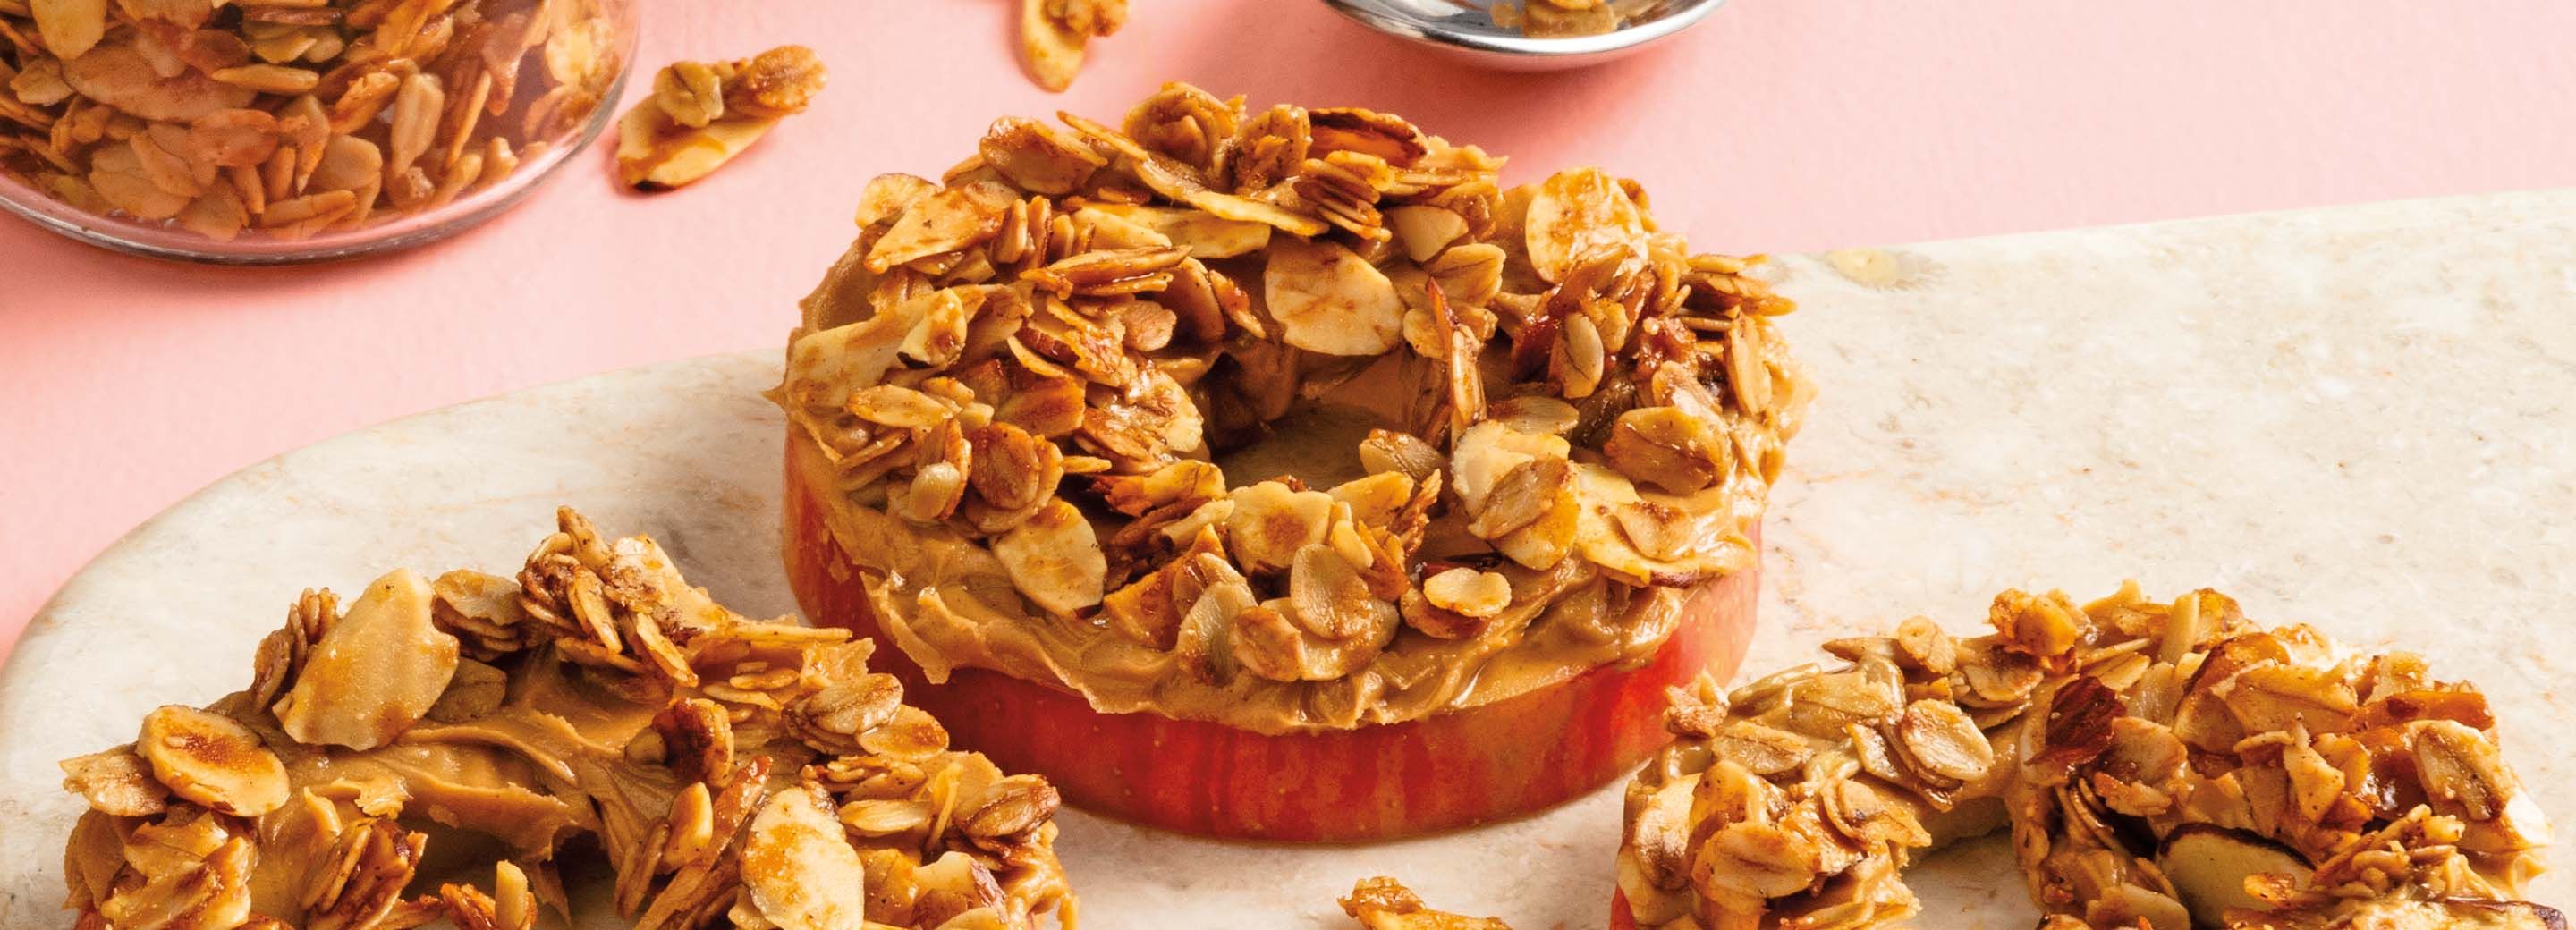 Apple Rings with Peanut Butter